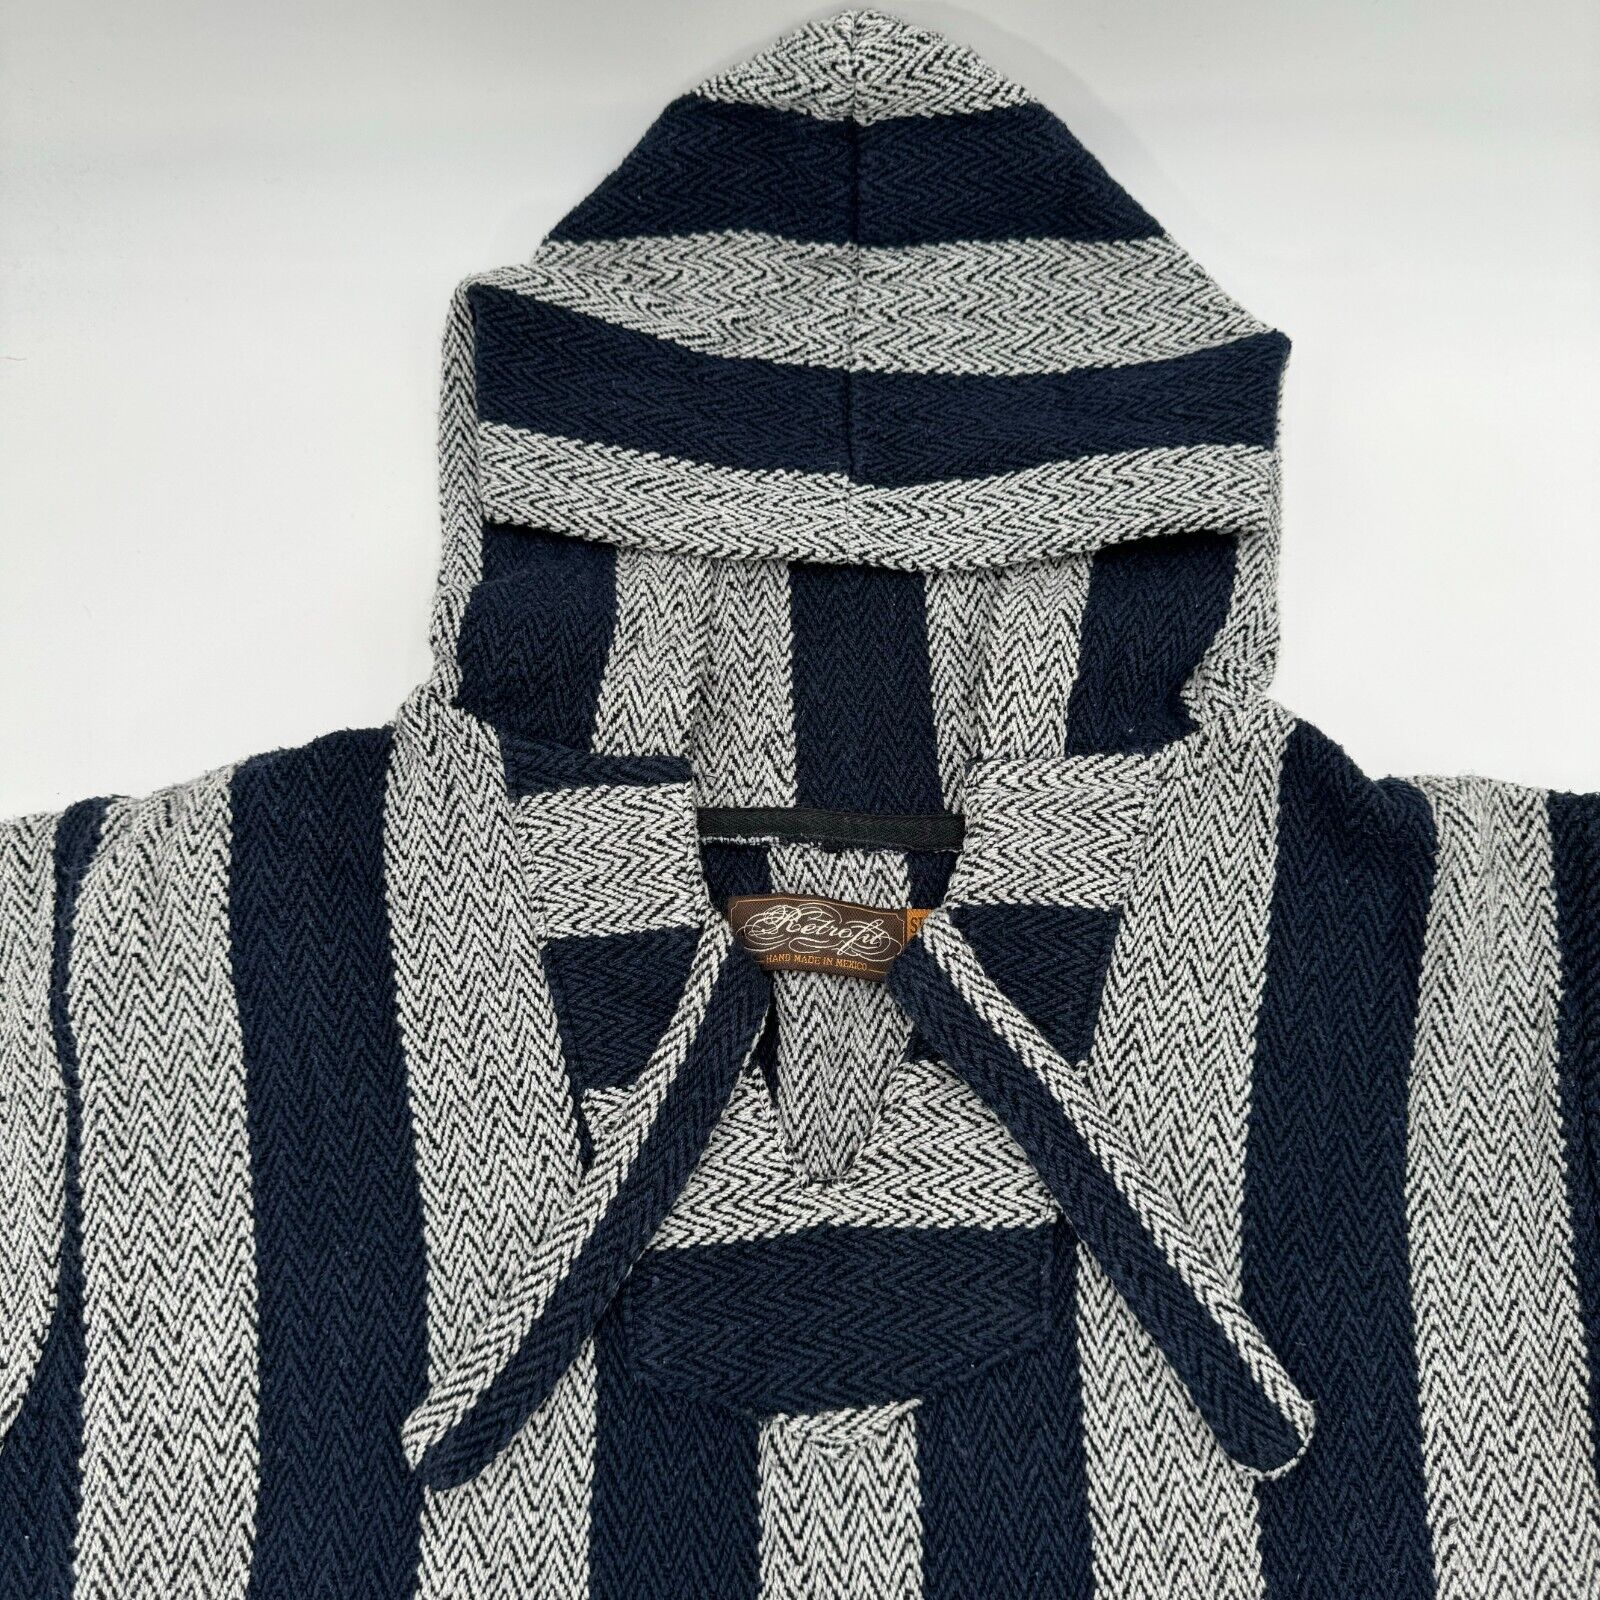 Retro Fit Handmade Mexico Woven Baja Hooded Poncho Pullover Pocket Mens Size L